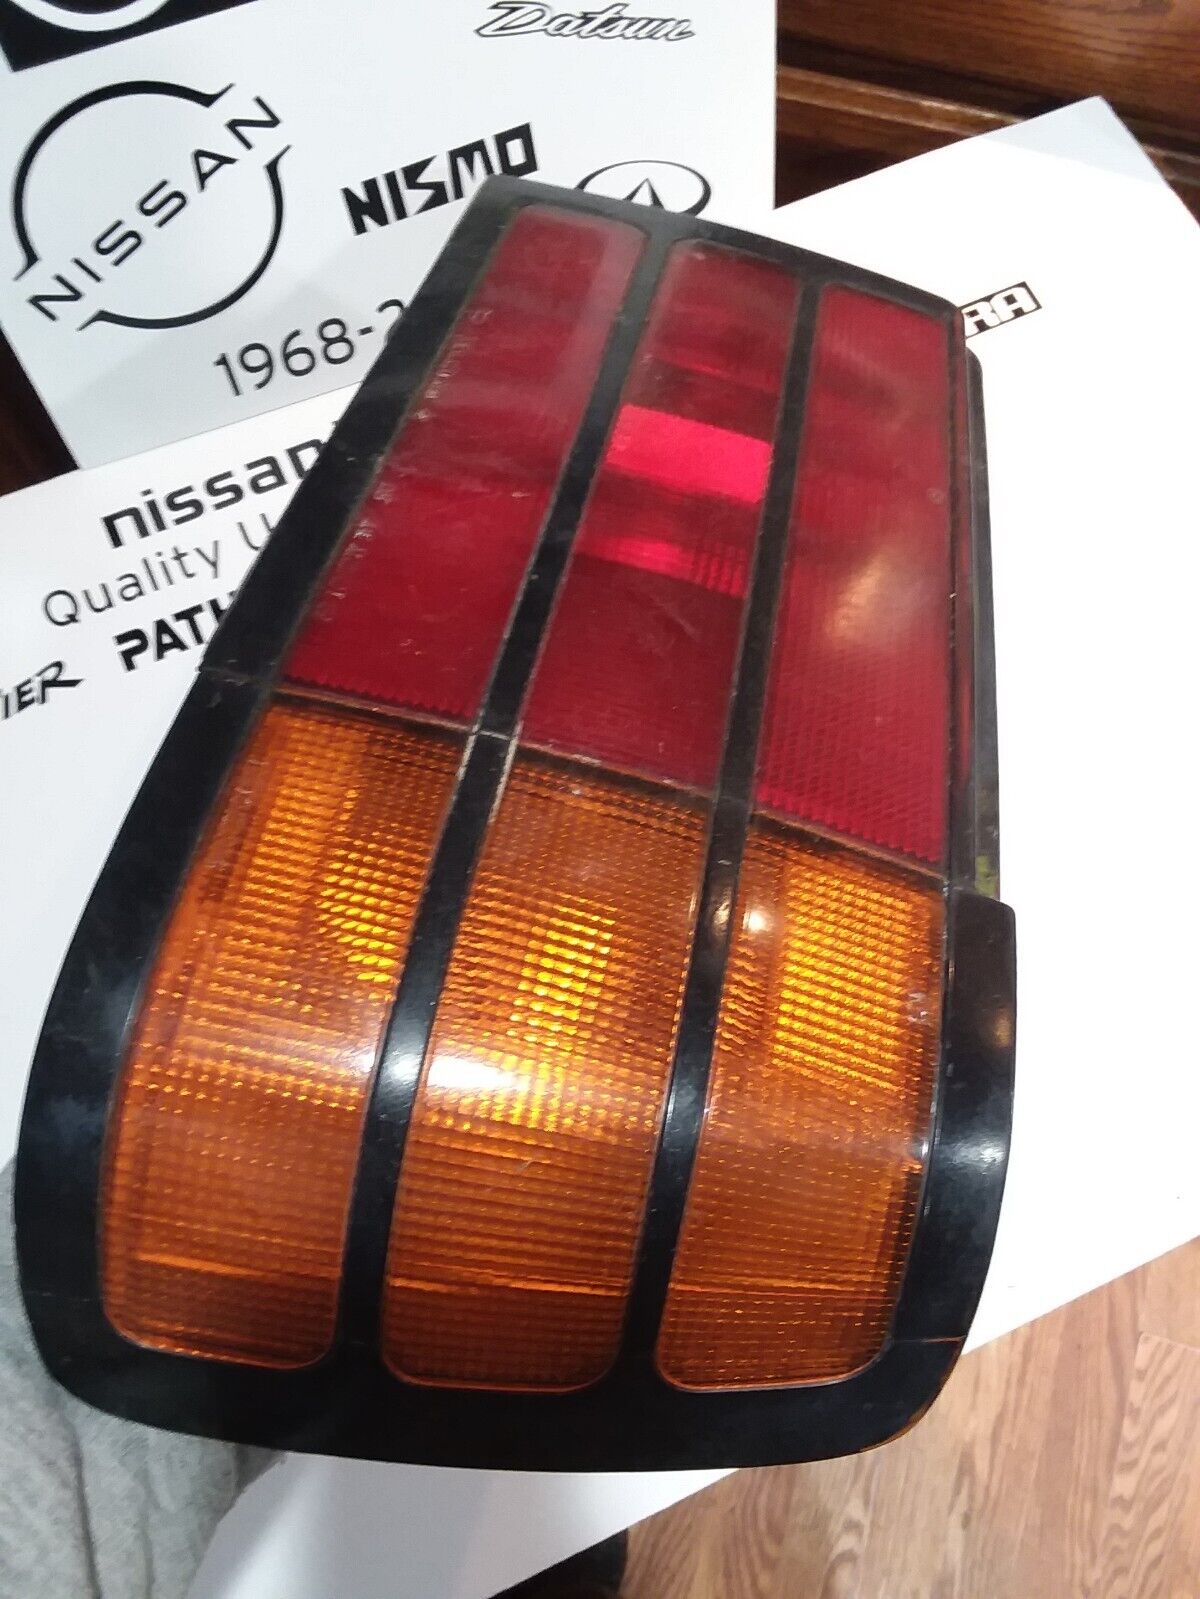 84-86 Nissan 200sx Coupe Right Rear Taillight S12 Silvia